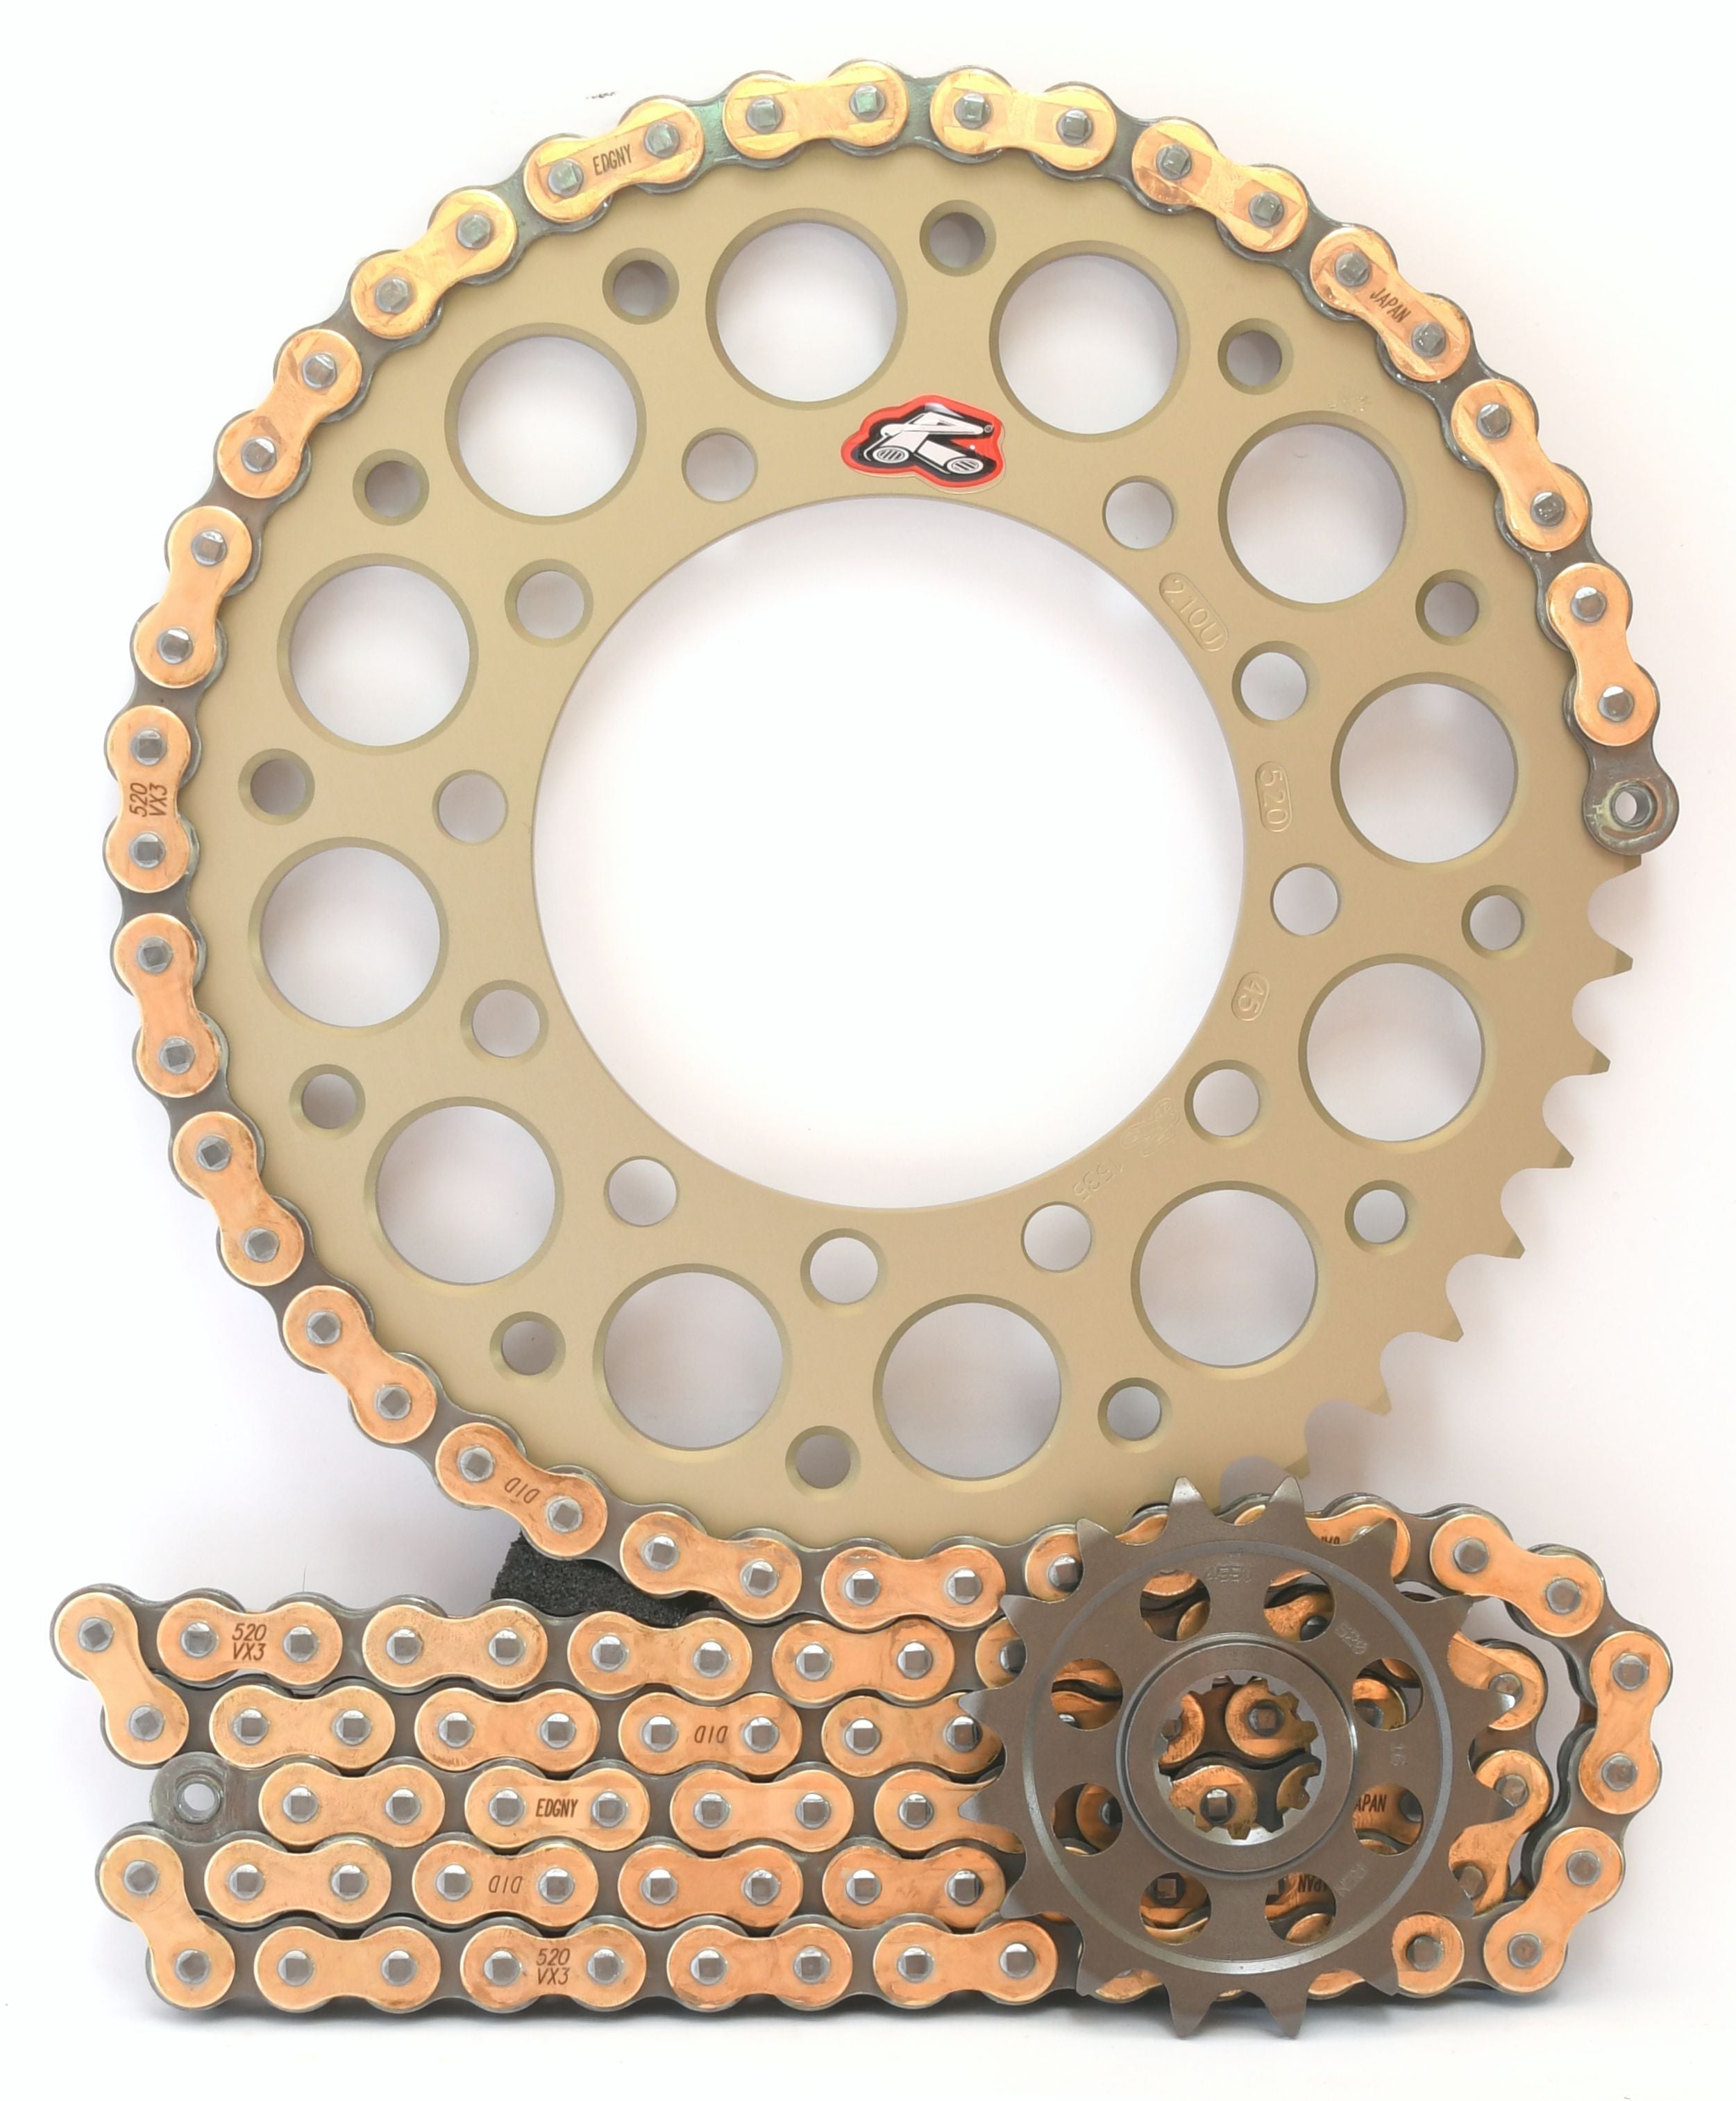 Renthal Ultralight and DID 520 Conversion Chain & Sprocket Kit for Yamaha YZF R1 2009-2014 - Standard Gearing